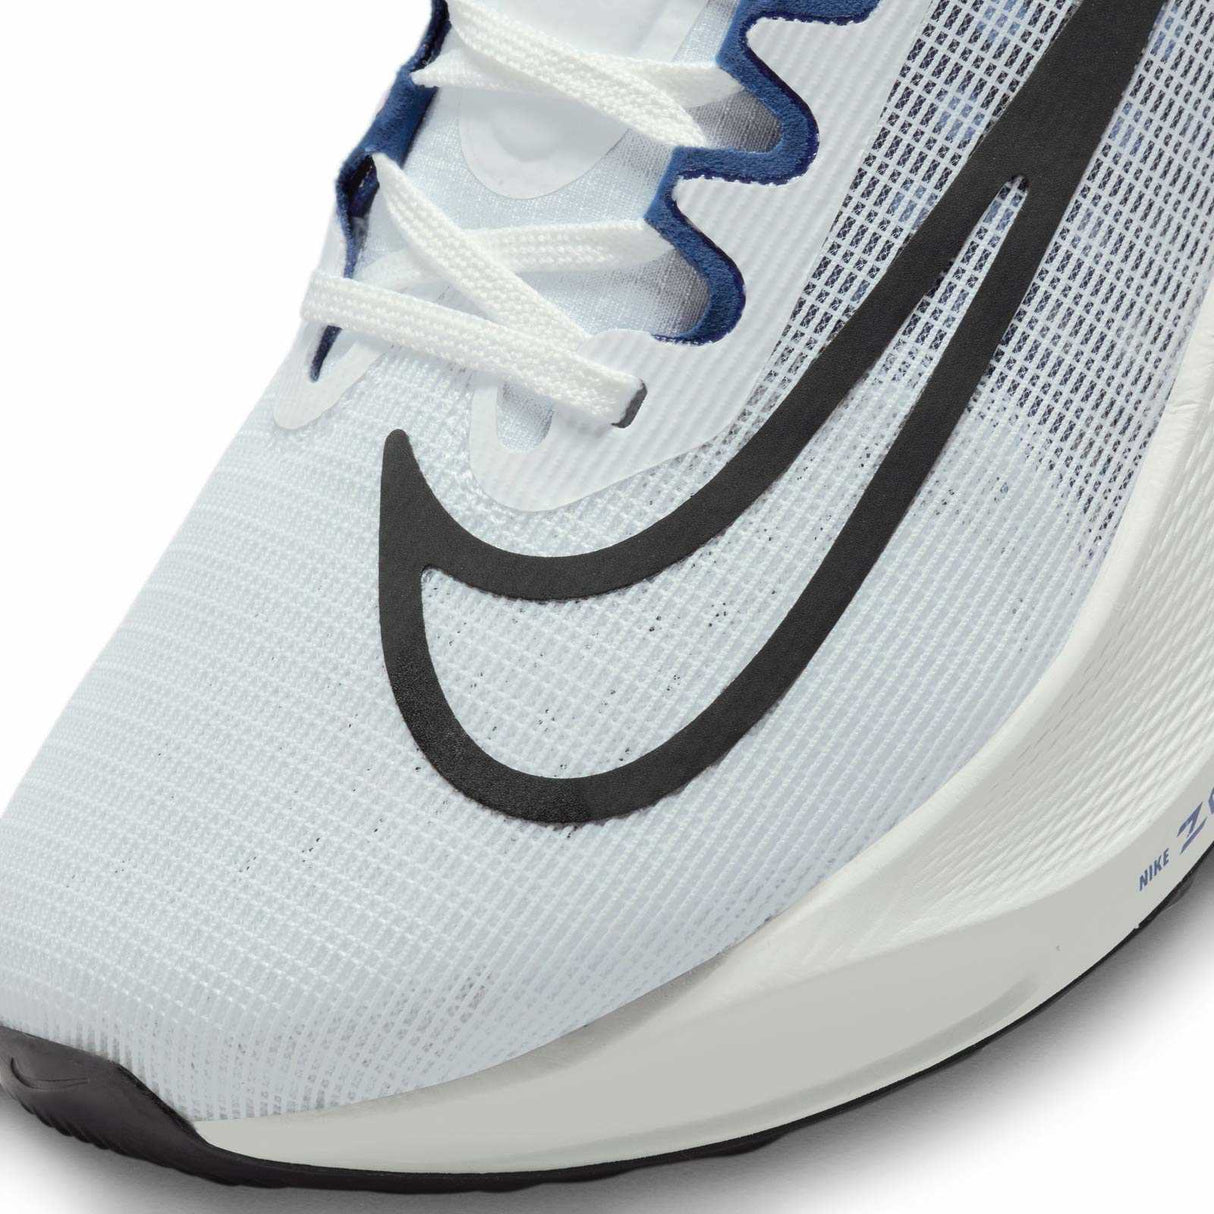 Nike Zoom Fly 5 Mens Running Shoes